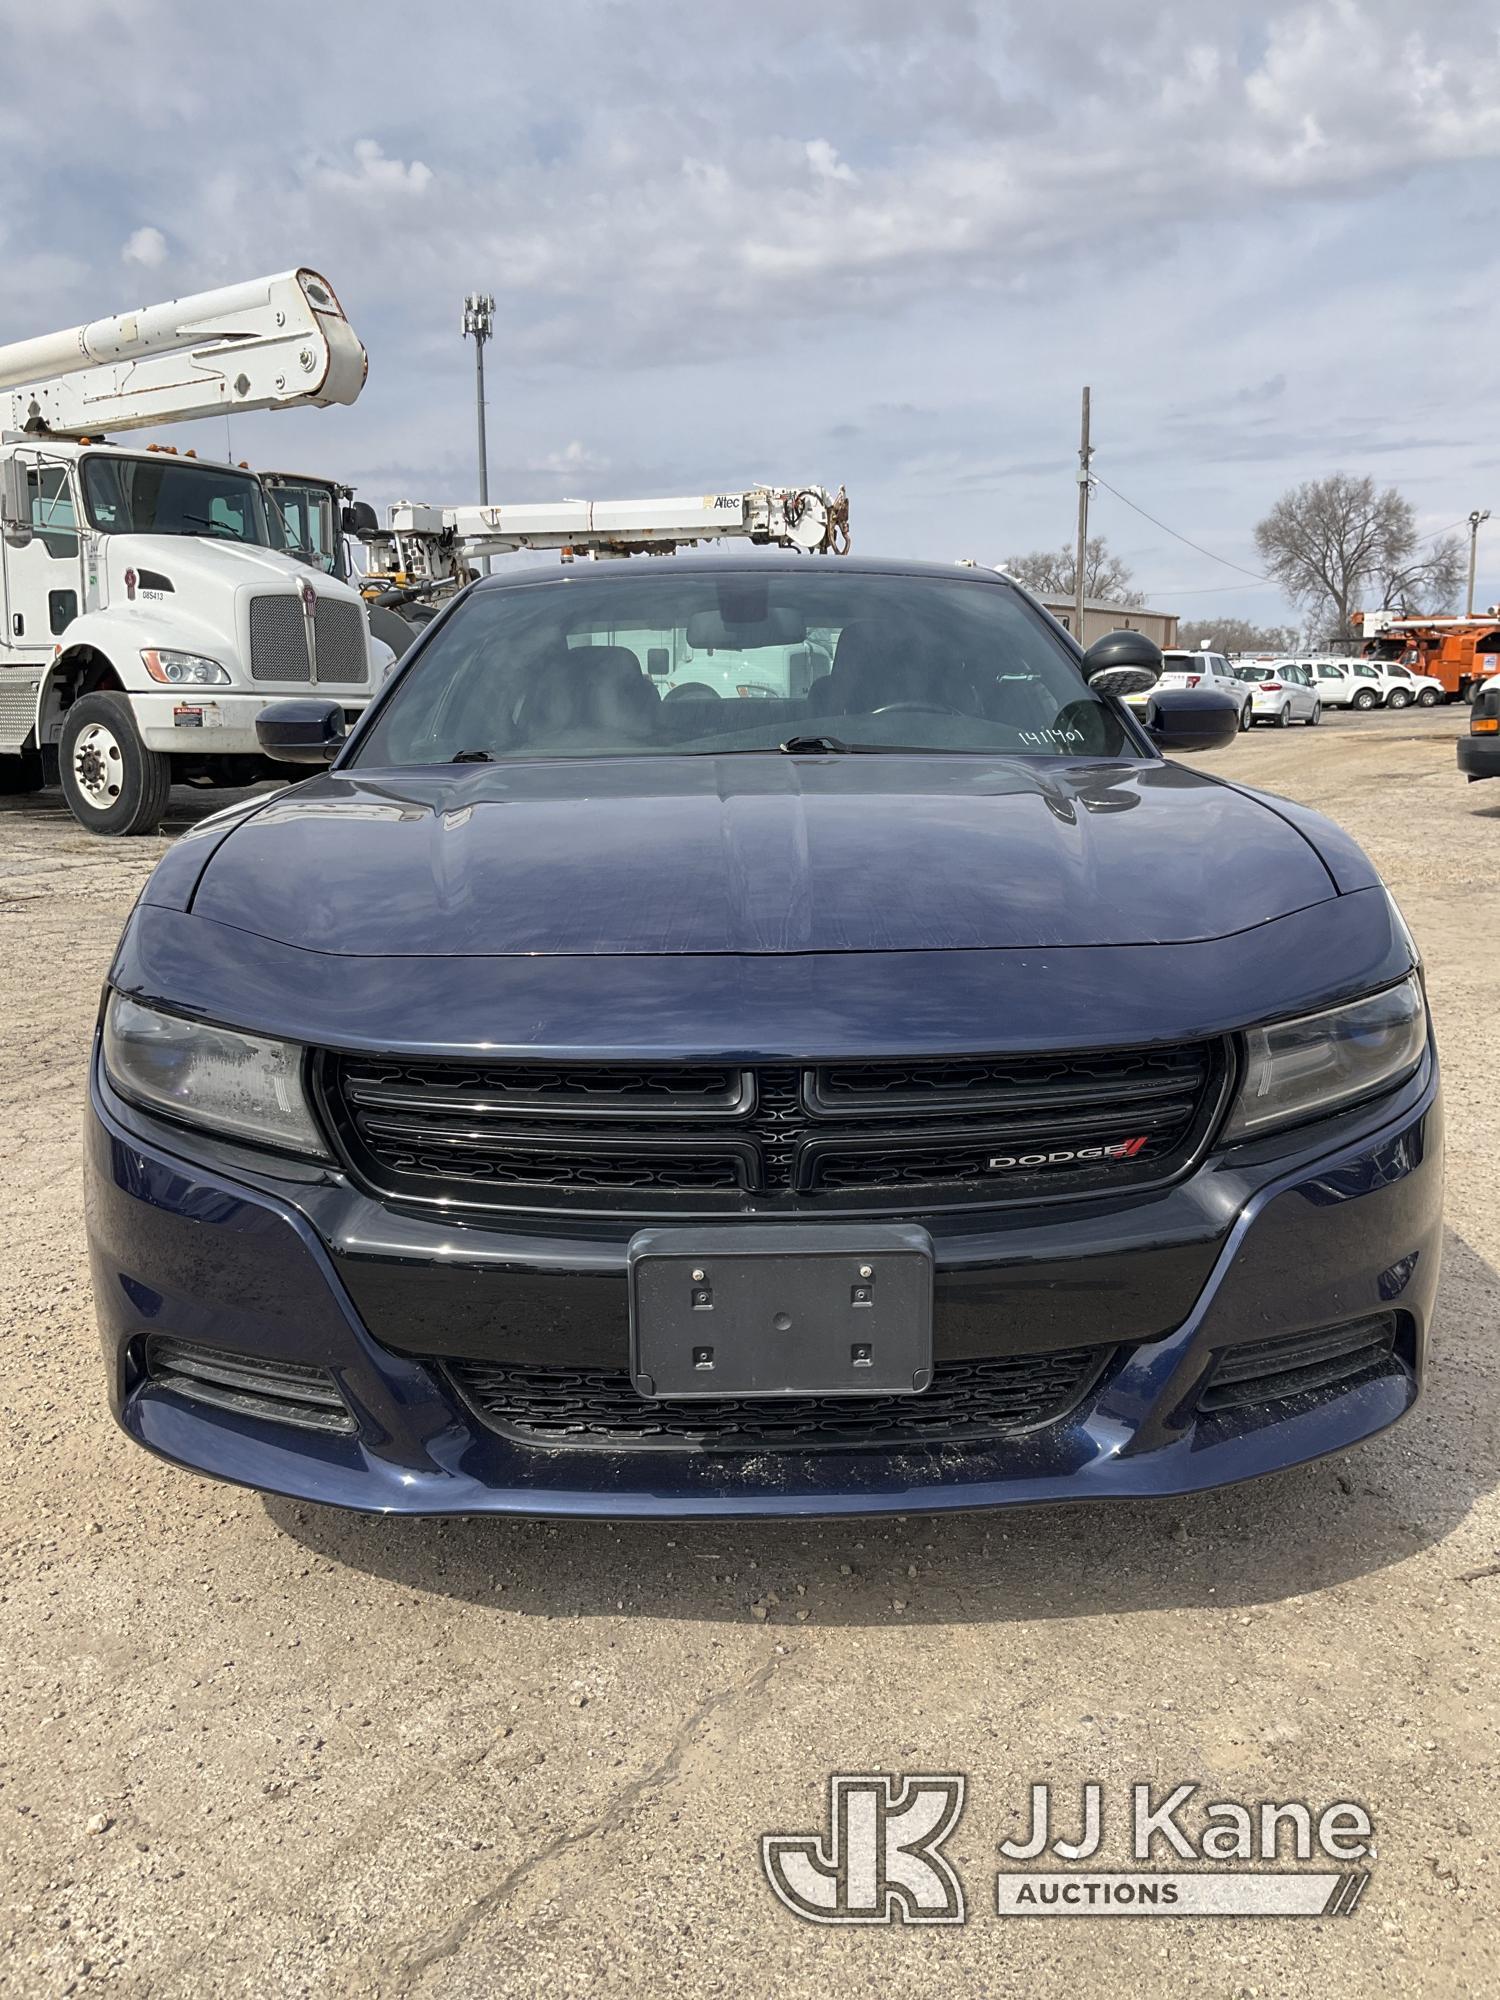 (South Beloit, IL) 2017 Dodge Charger Police Package 4-Door Sedan Runs, Moves, Roof Damage